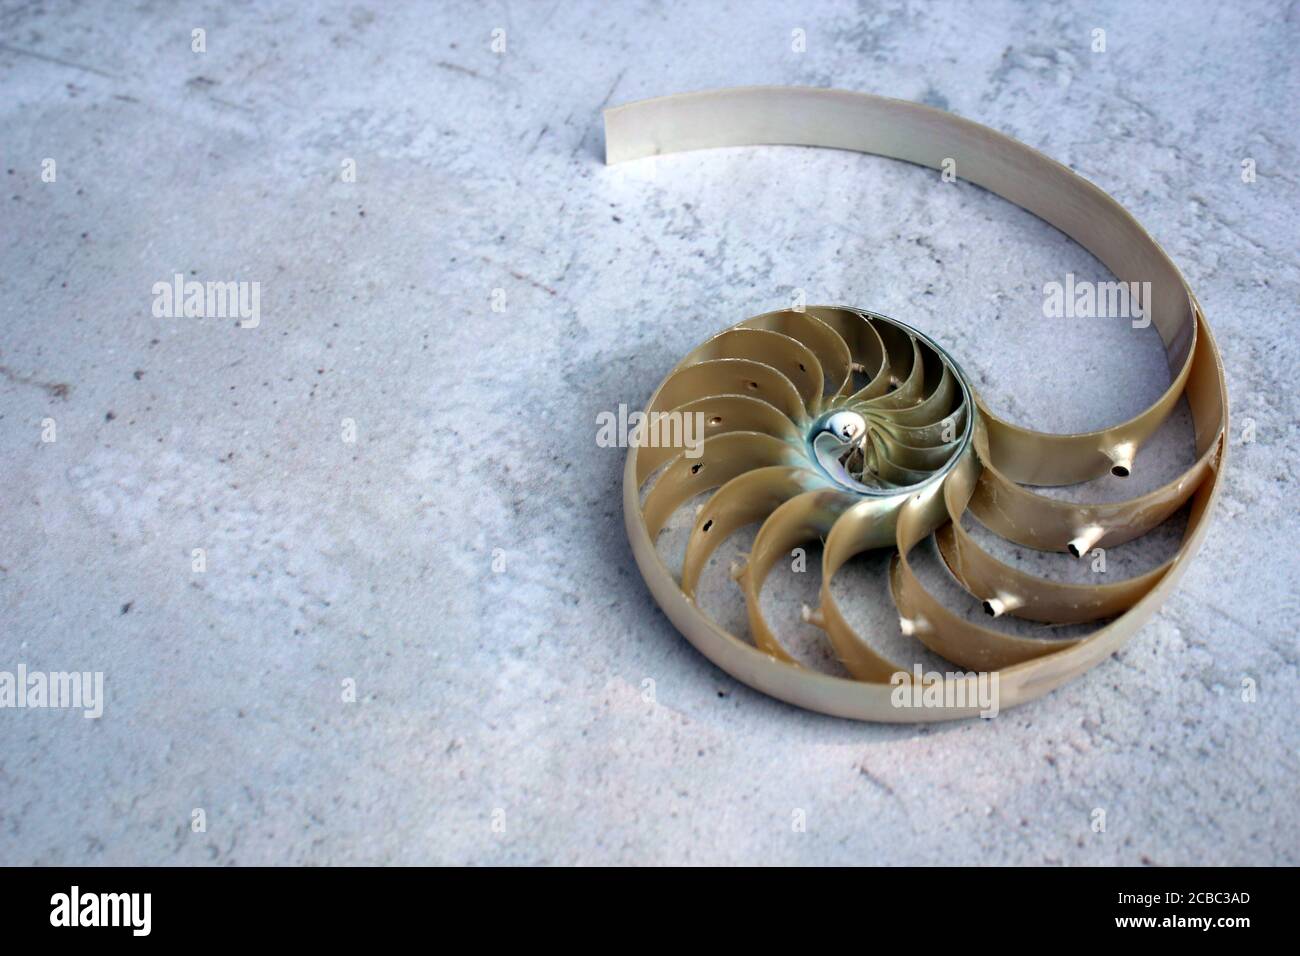 Shell Nautilus Fibonacci Section Spiral Pearl Symmetry Half Cross Golden Ratio Shell Structure Close Up Mother Pearl Pompilius Nautilus Shell Stock Photo Alamy